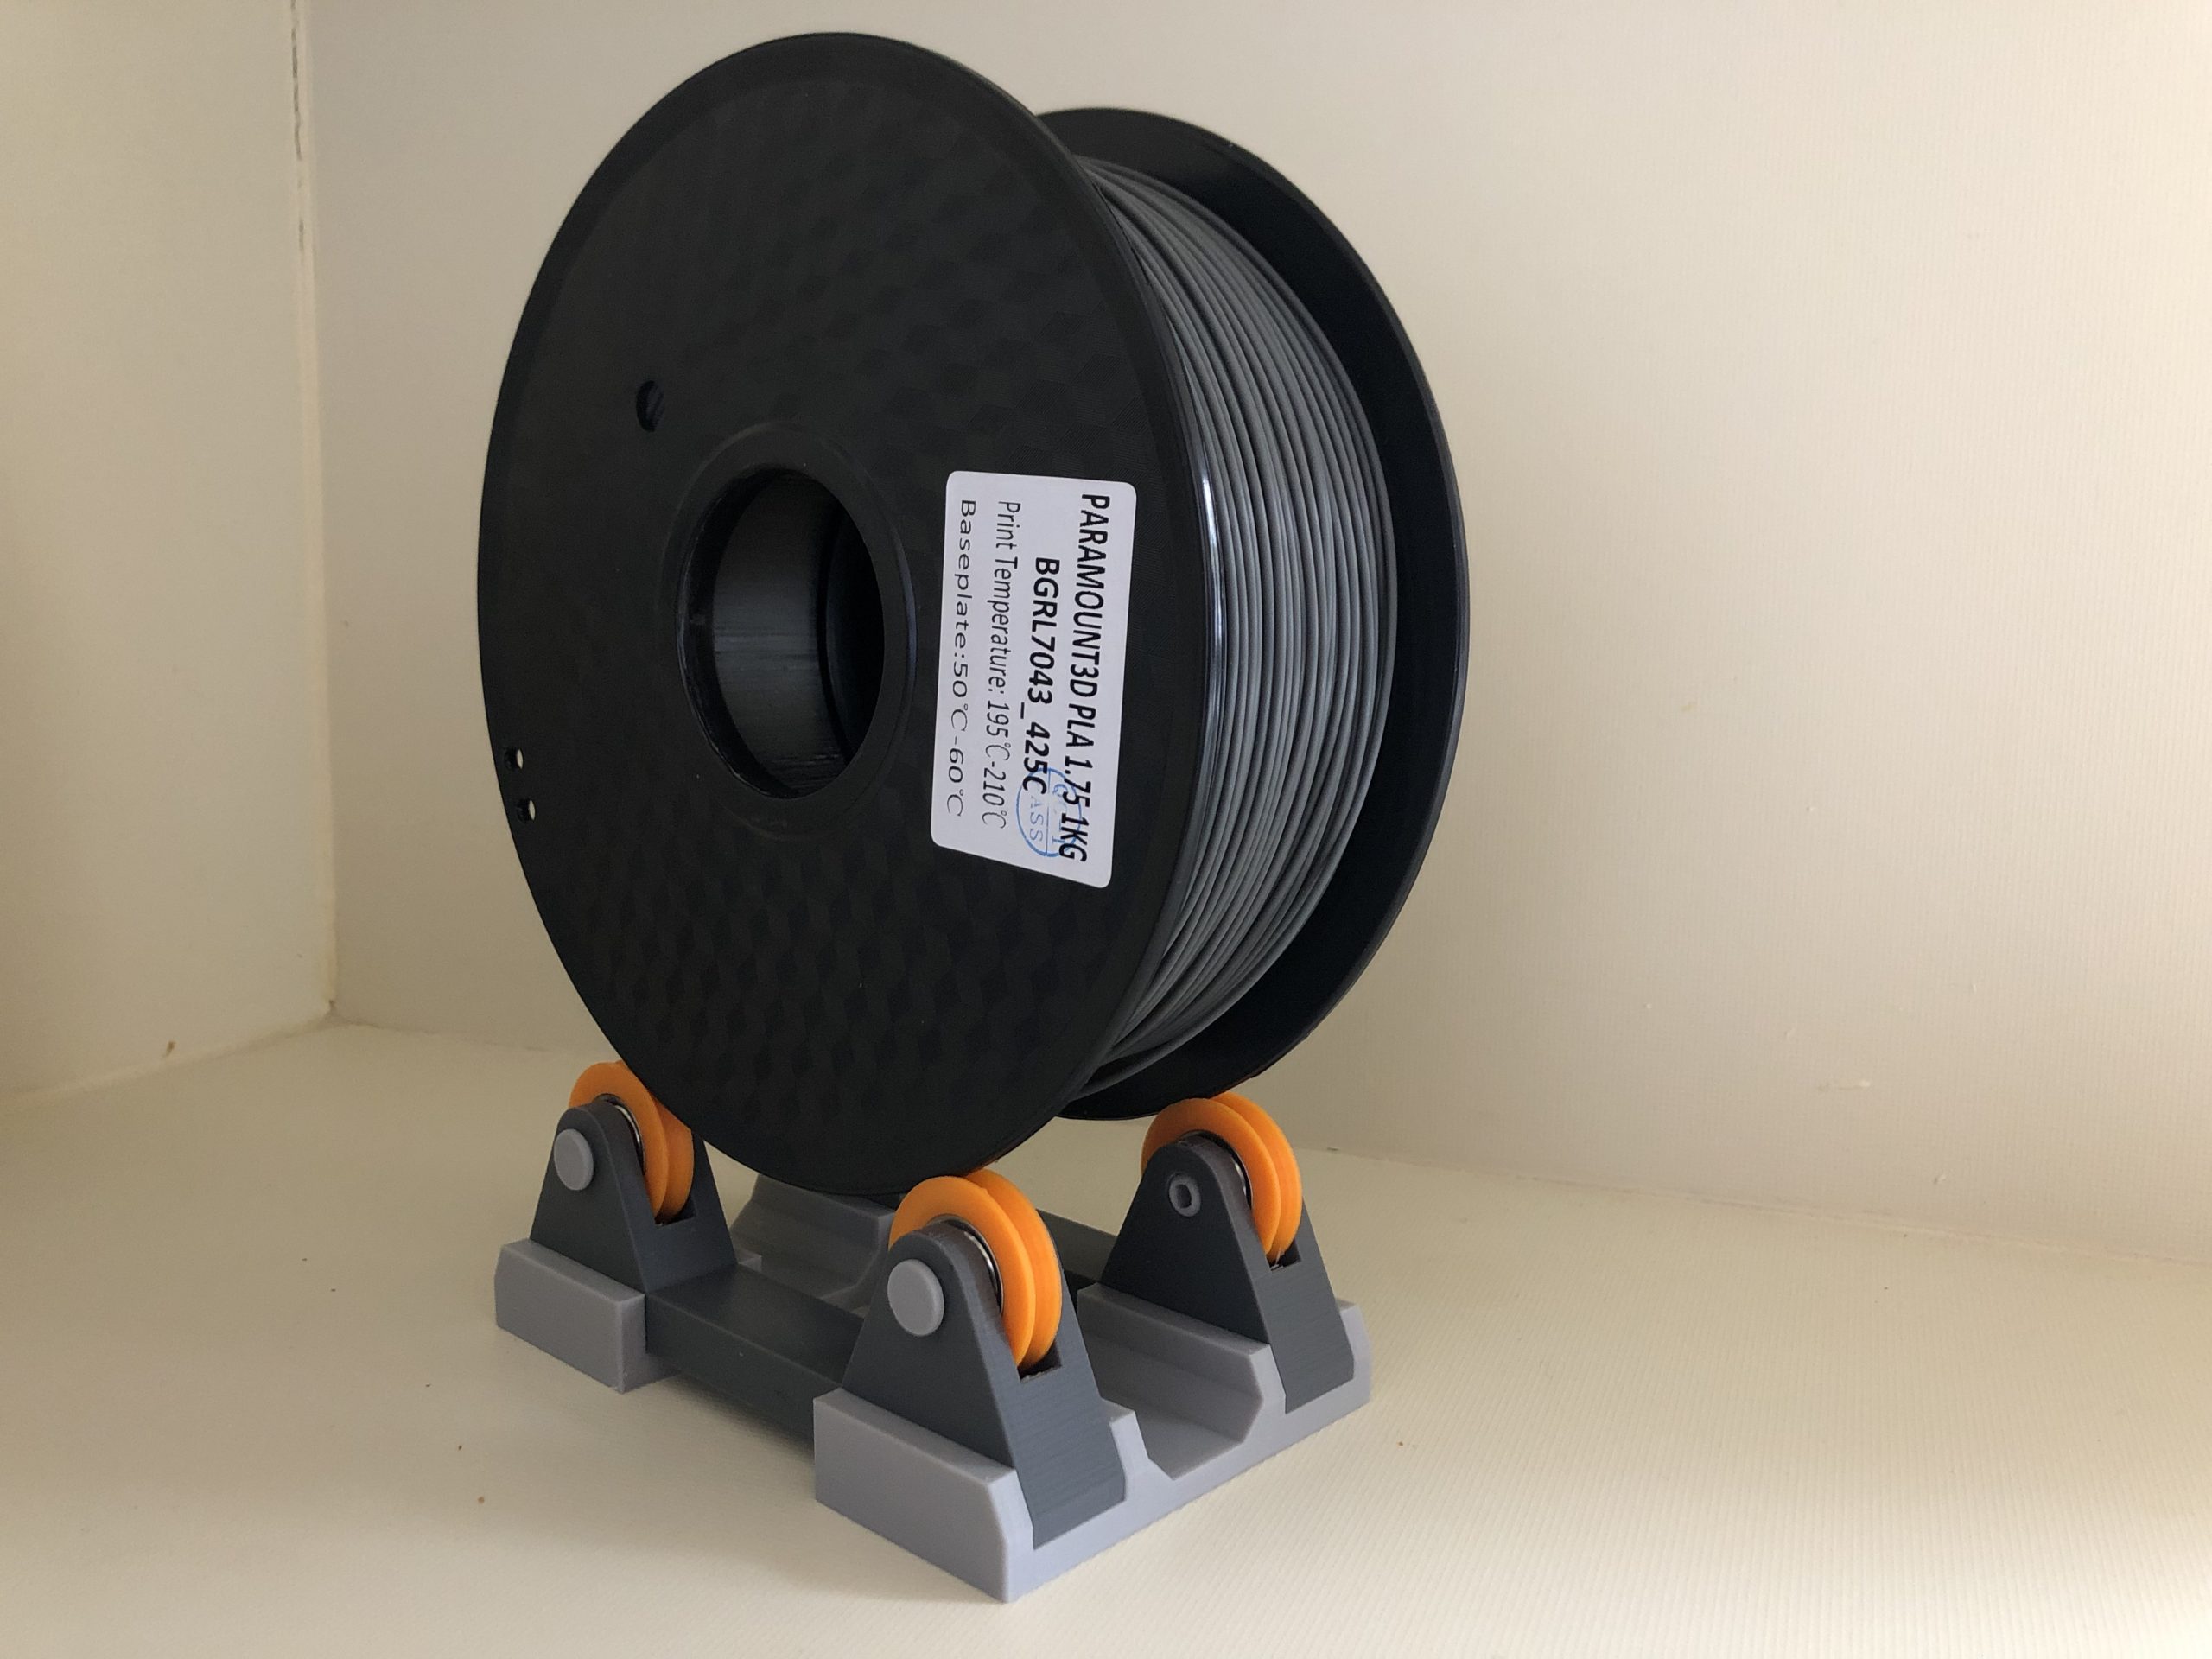 A Filament Spool Holder for 3D Printers - IMG 3061 ScaleD